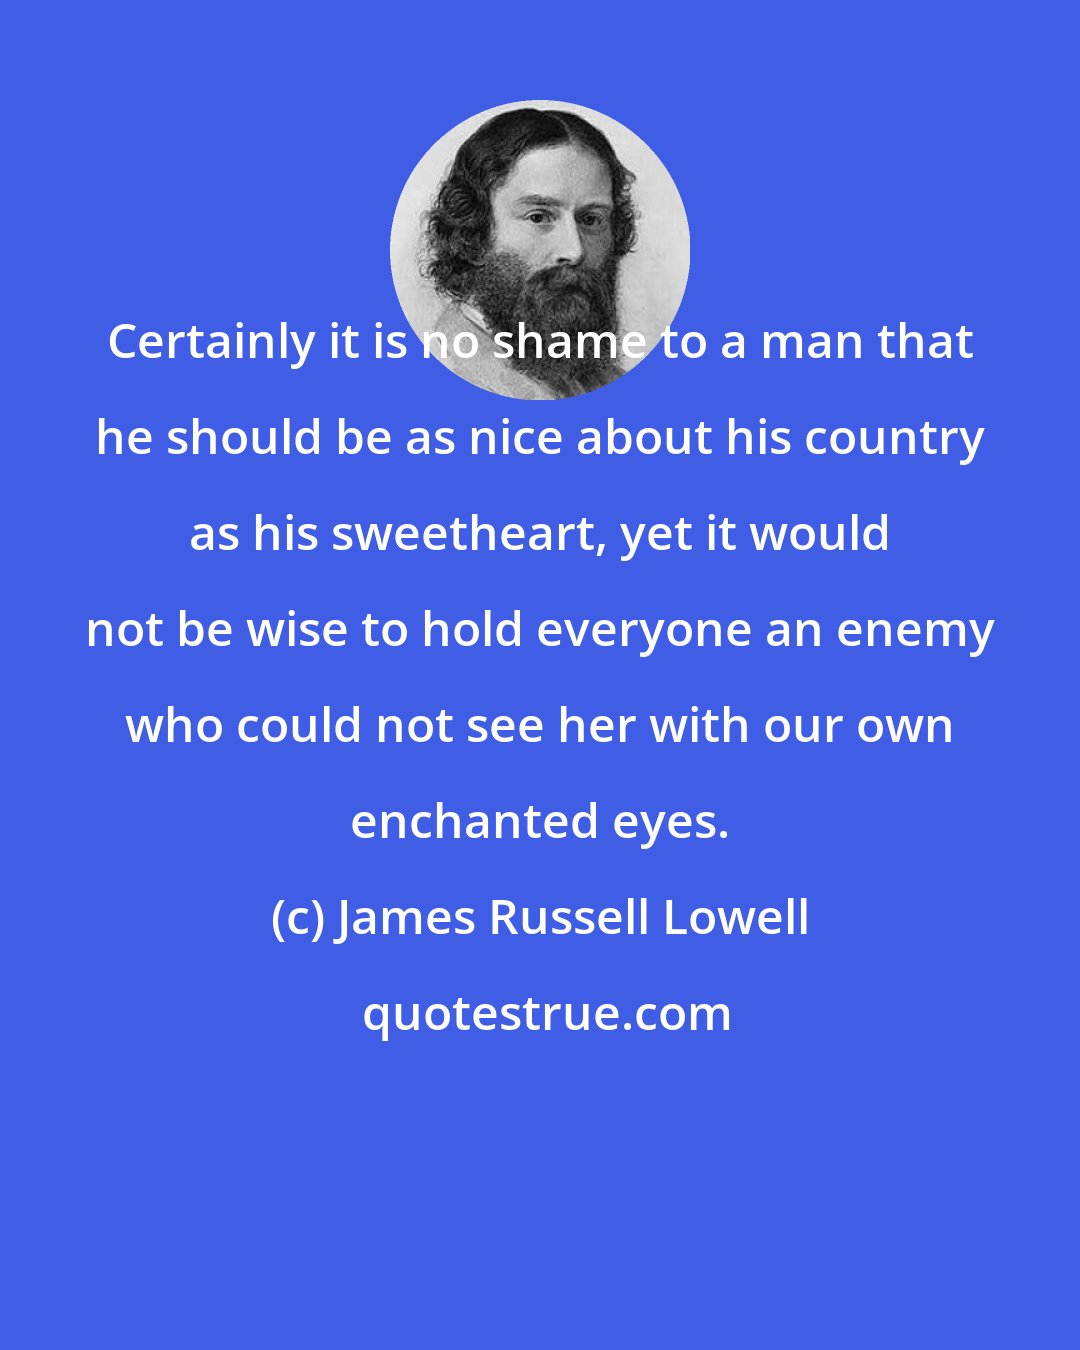 James Russell Lowell: Certainly it is no shame to a man that he should be as nice about his country as his sweetheart, yet it would not be wise to hold everyone an enemy who could not see her with our own enchanted eyes.